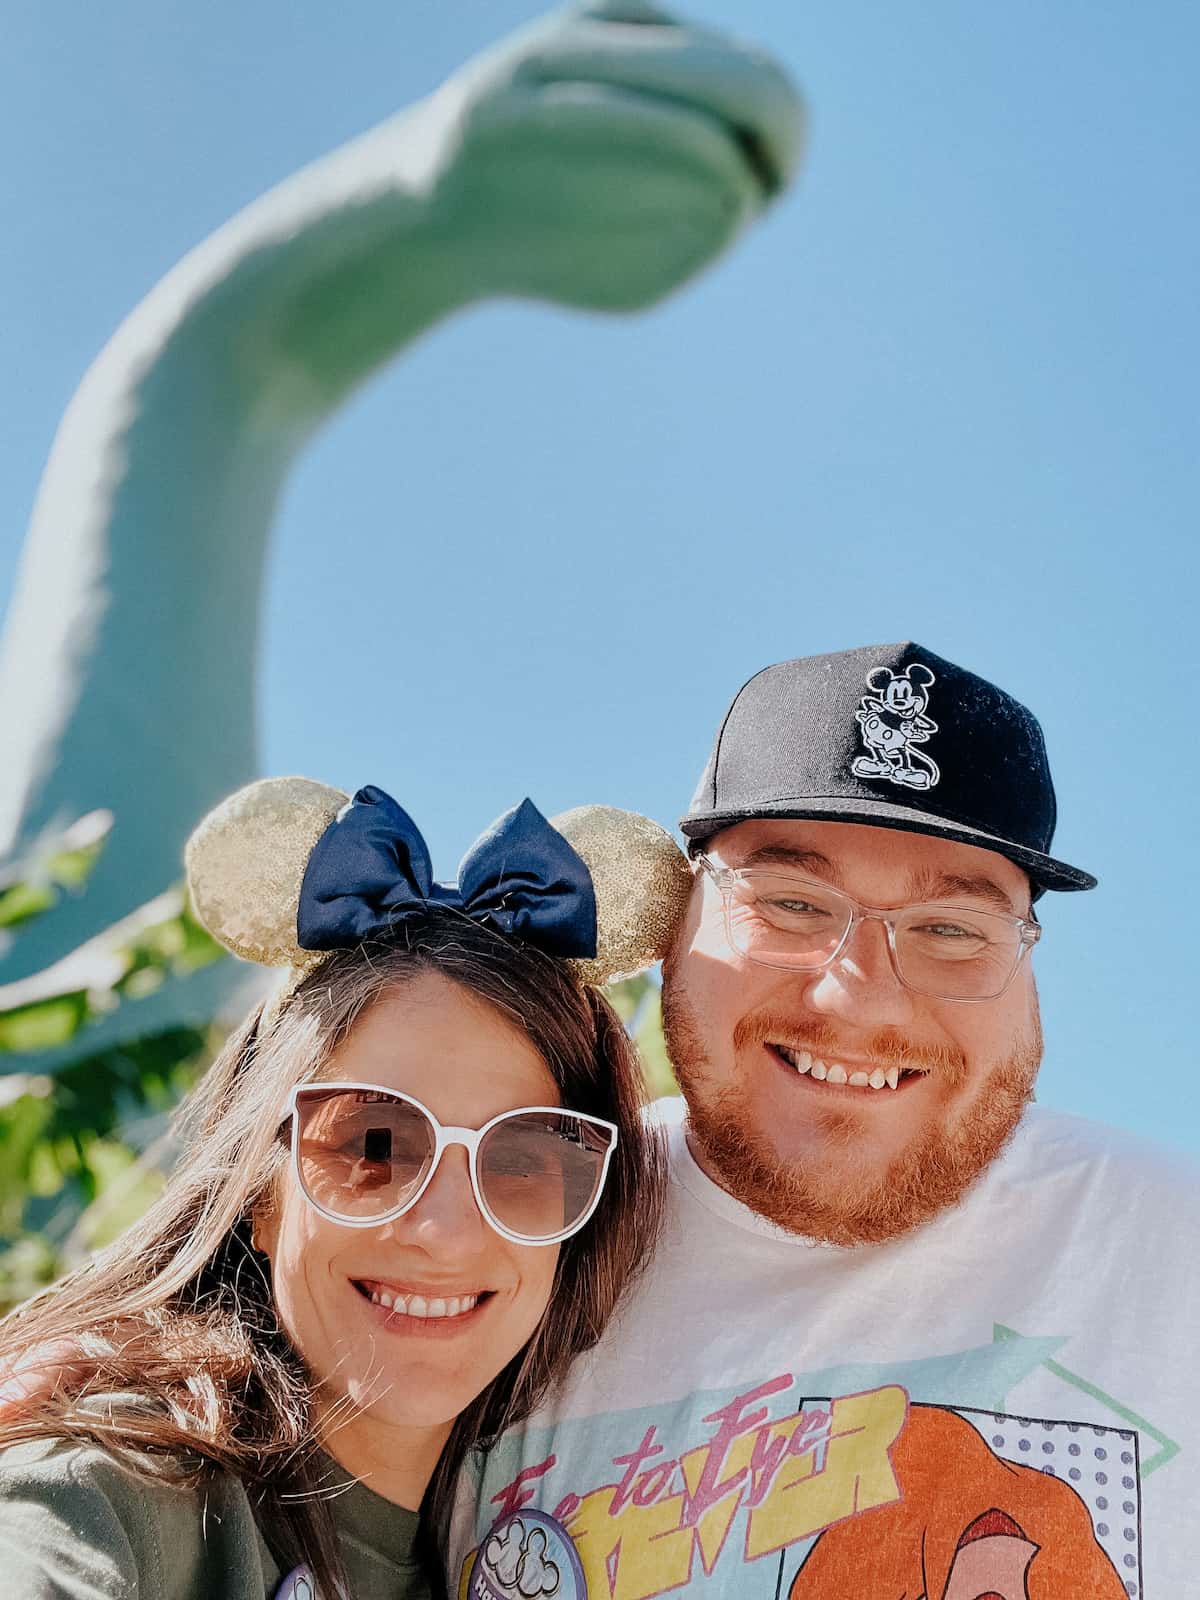 Our Adults-Only Disney World Trip